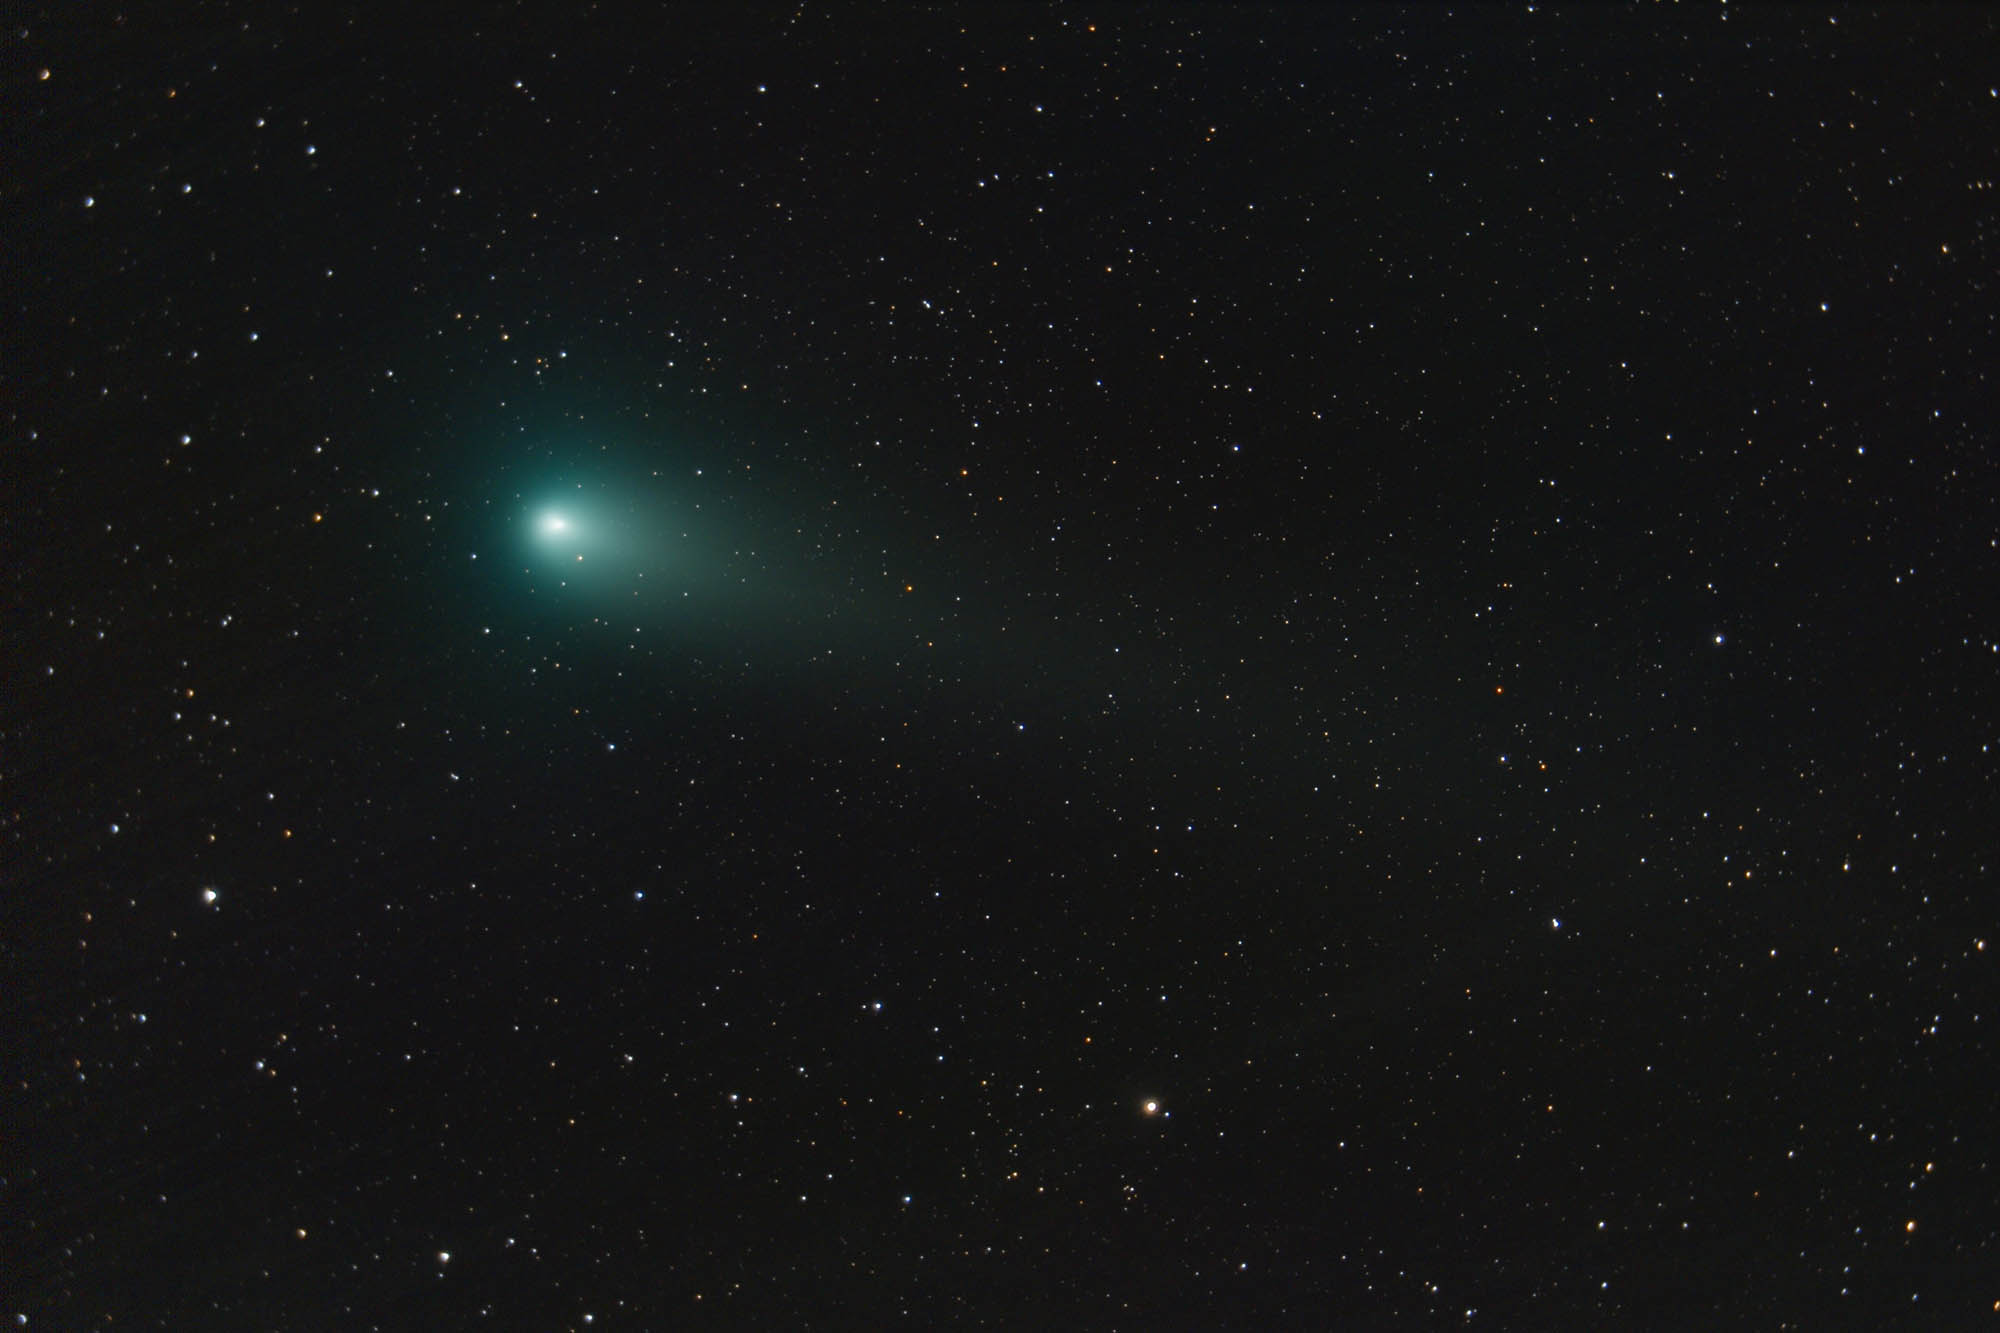 How to See the Bright Green Comet 21P in Binoculars on Monday Space